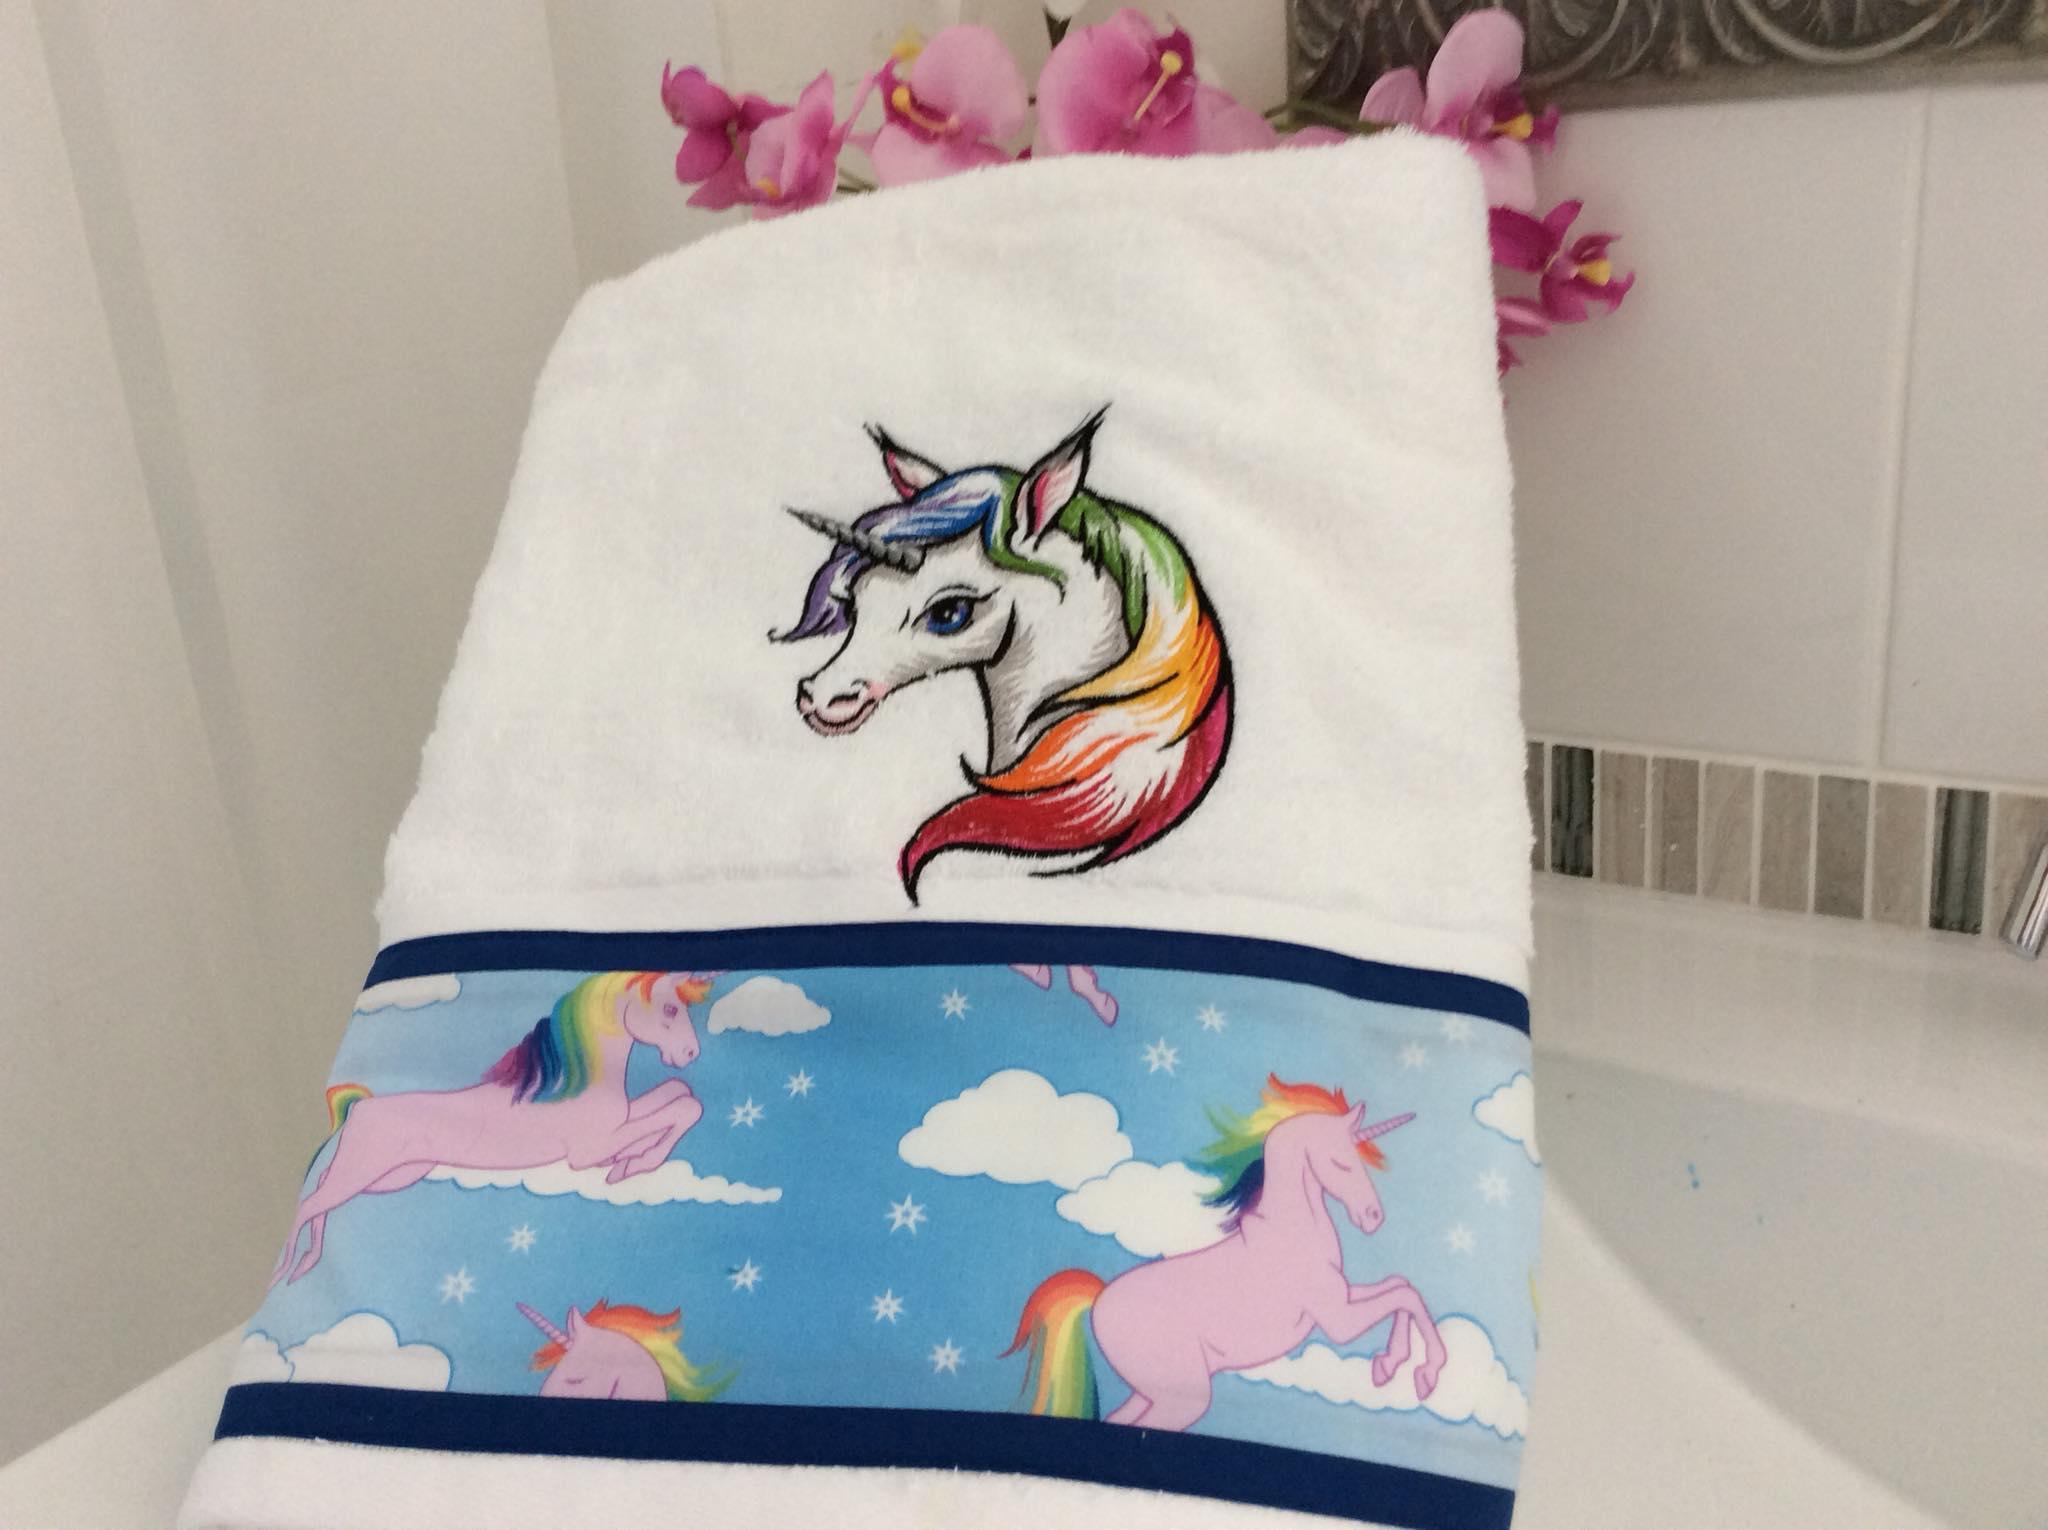 Embroidered towel with Colorful unicorn design